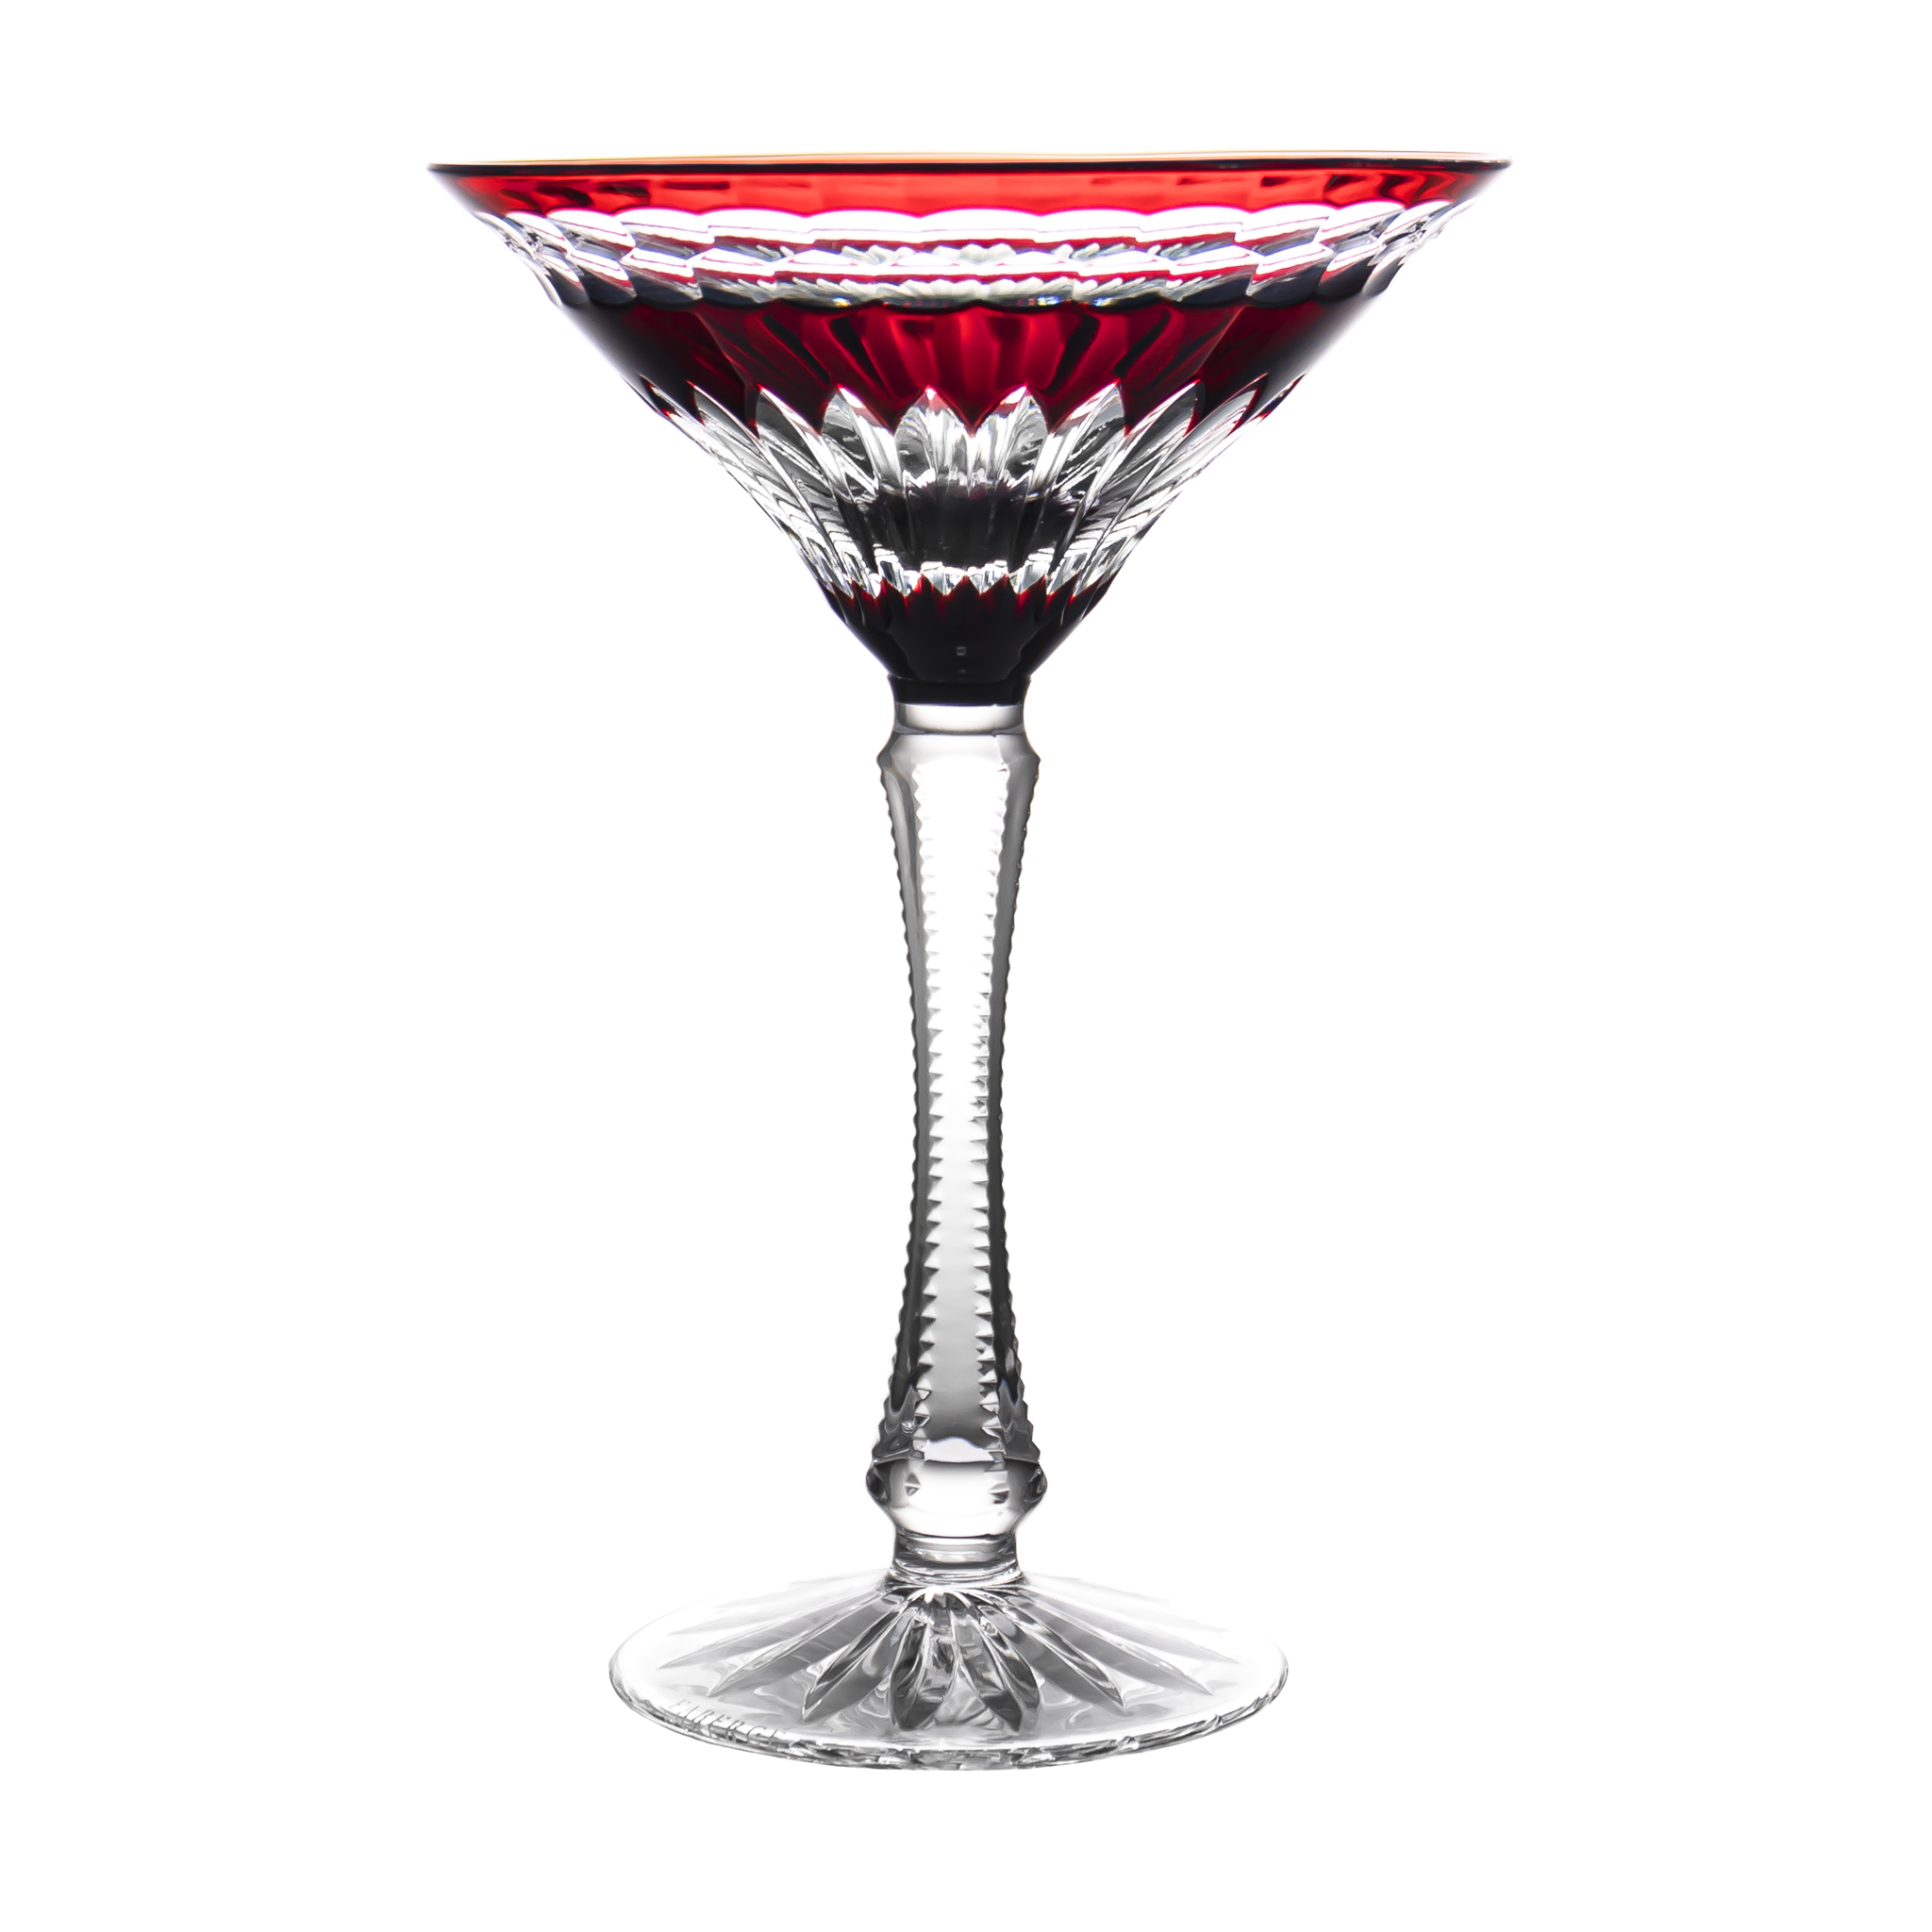 Fabergé Odessa Ruby Red Small Wine Glass 2nd Edition - Ajka Crystal